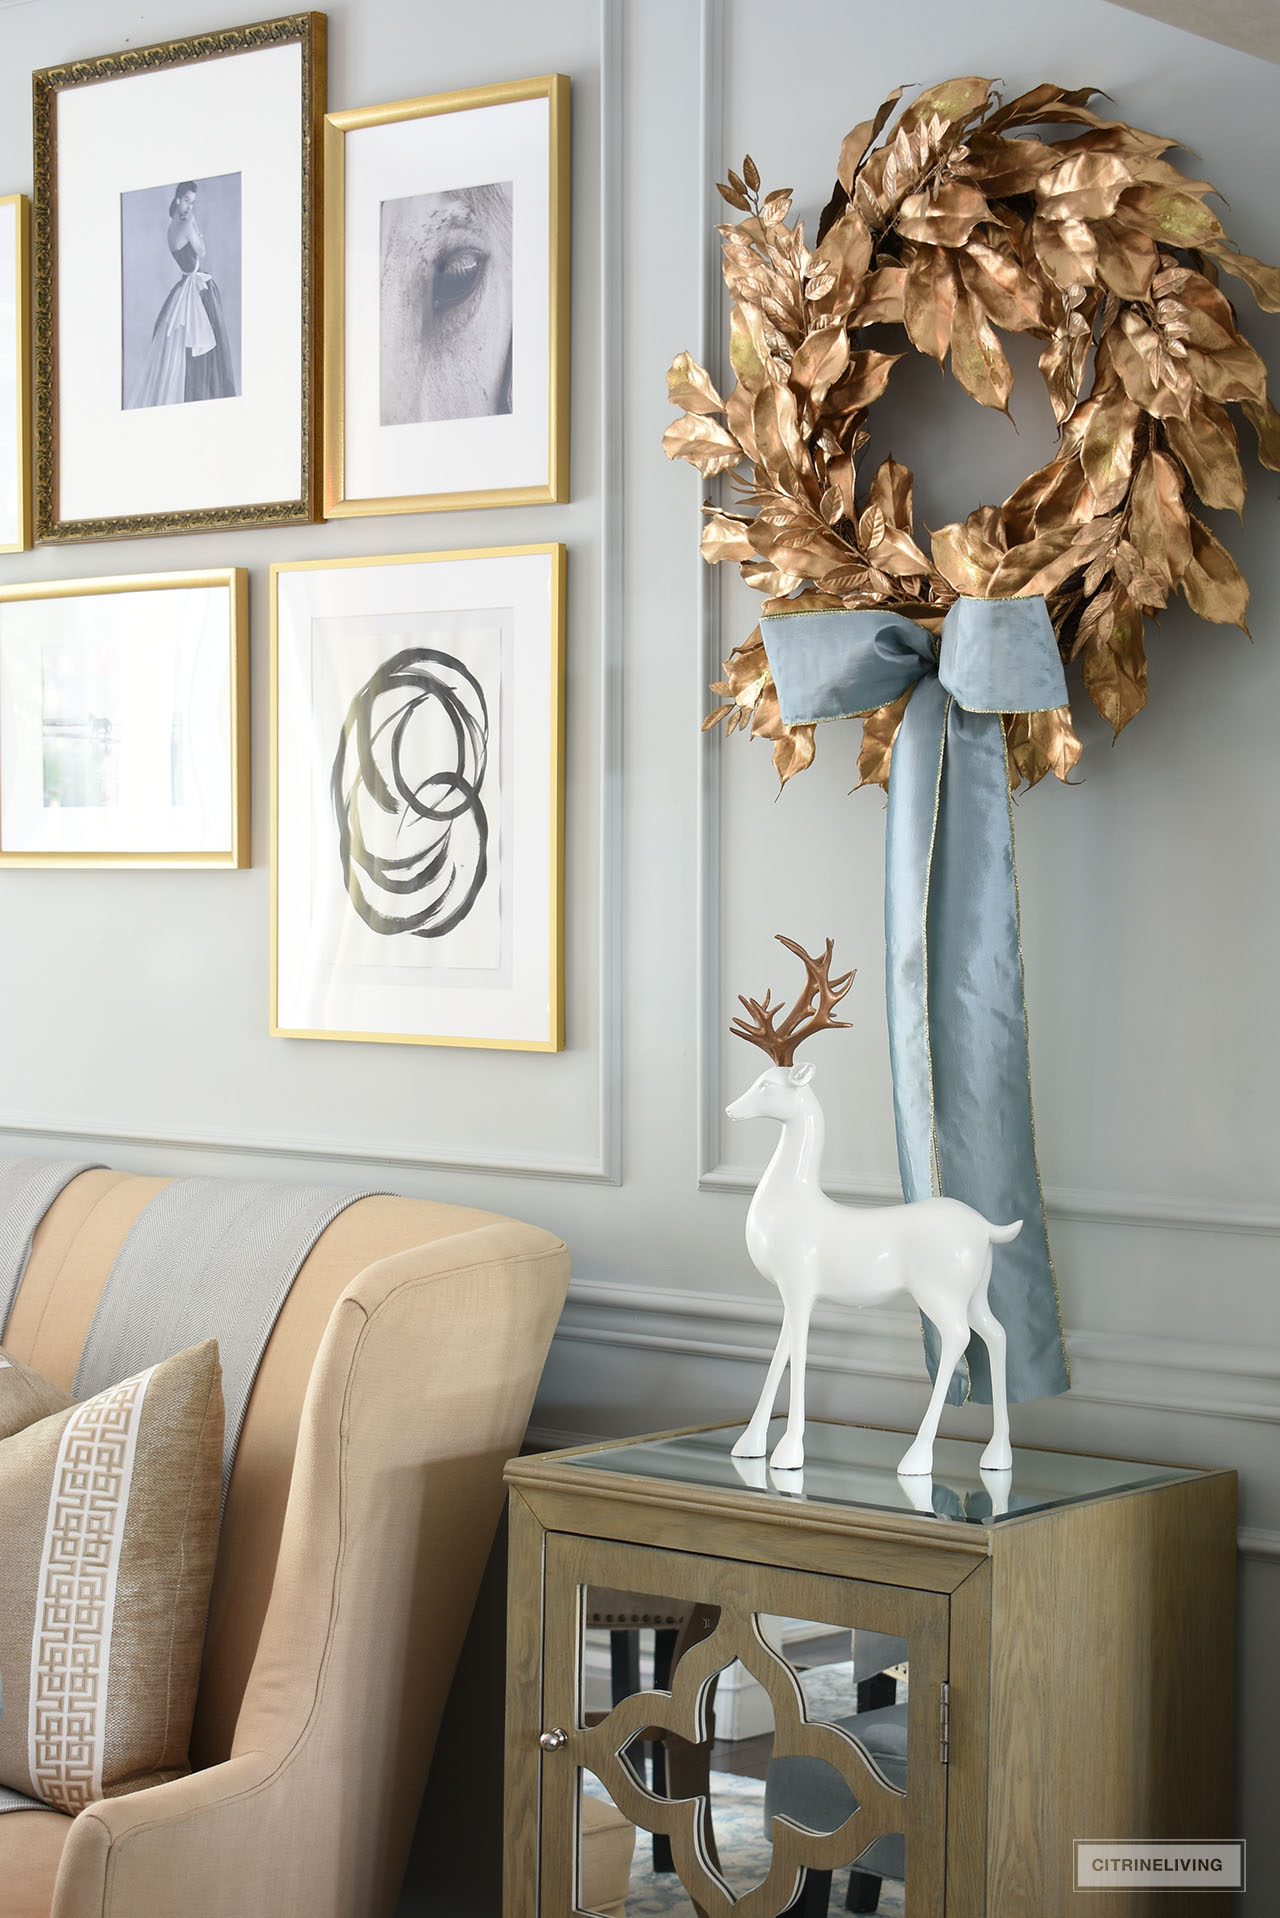 Good leaf wreath with a silver-blue taffeta bow hangs on a gallery wall with a simple and elegant white and gold reindeer standing below on top of a mirrored cabinet.